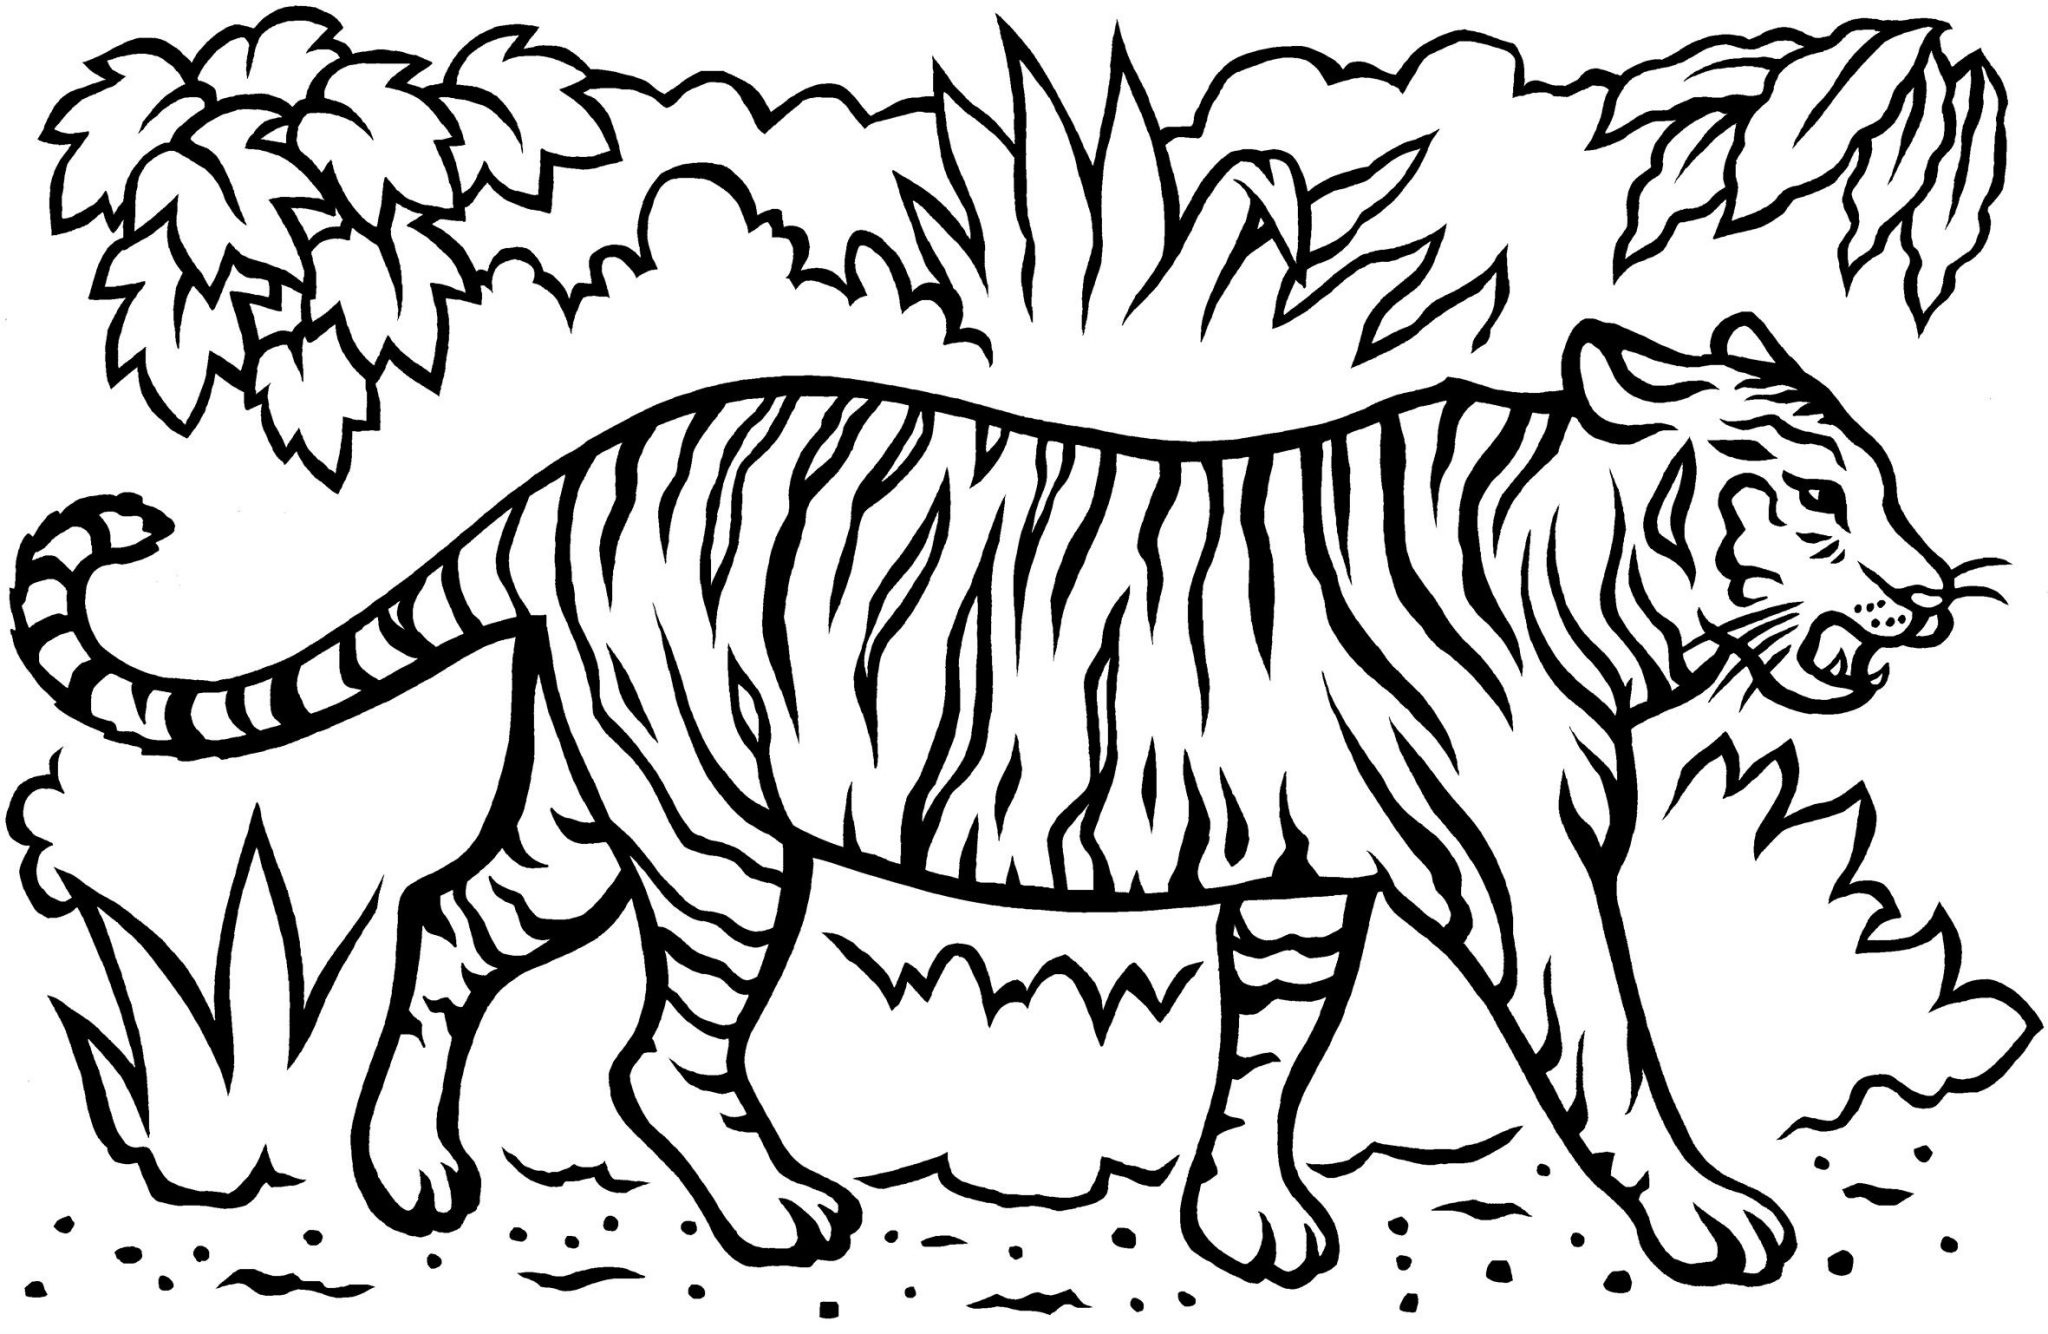 Fairytale tiger coloring book for children 6-7 years old